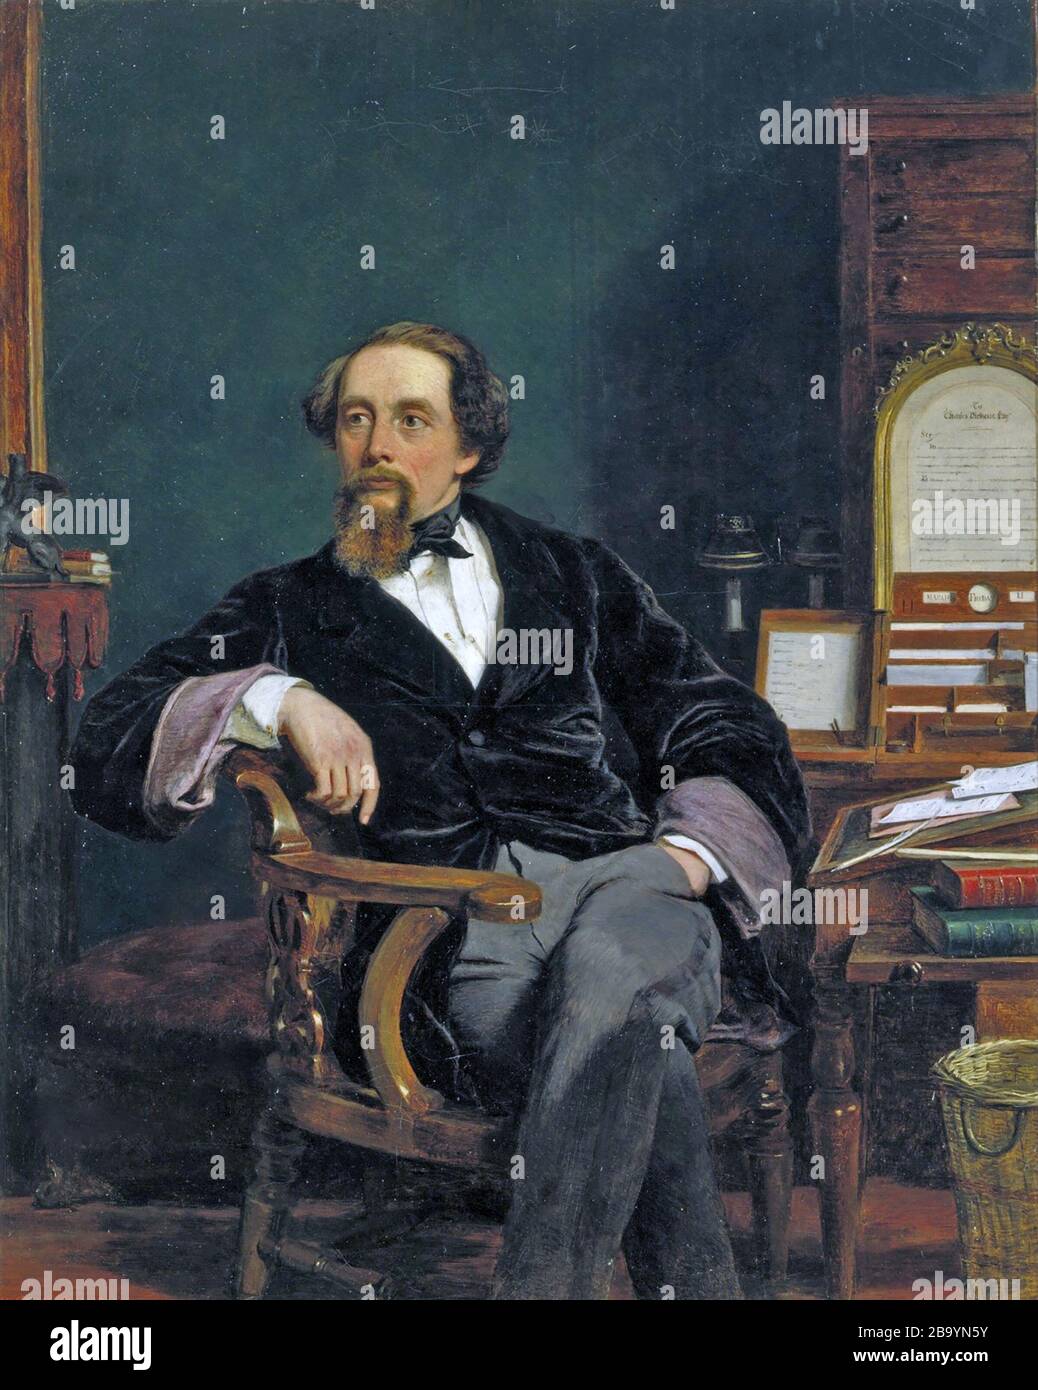 CHARLES DICKENS (1812-1870) English author painted by William Frith in 1859 Stock Photo